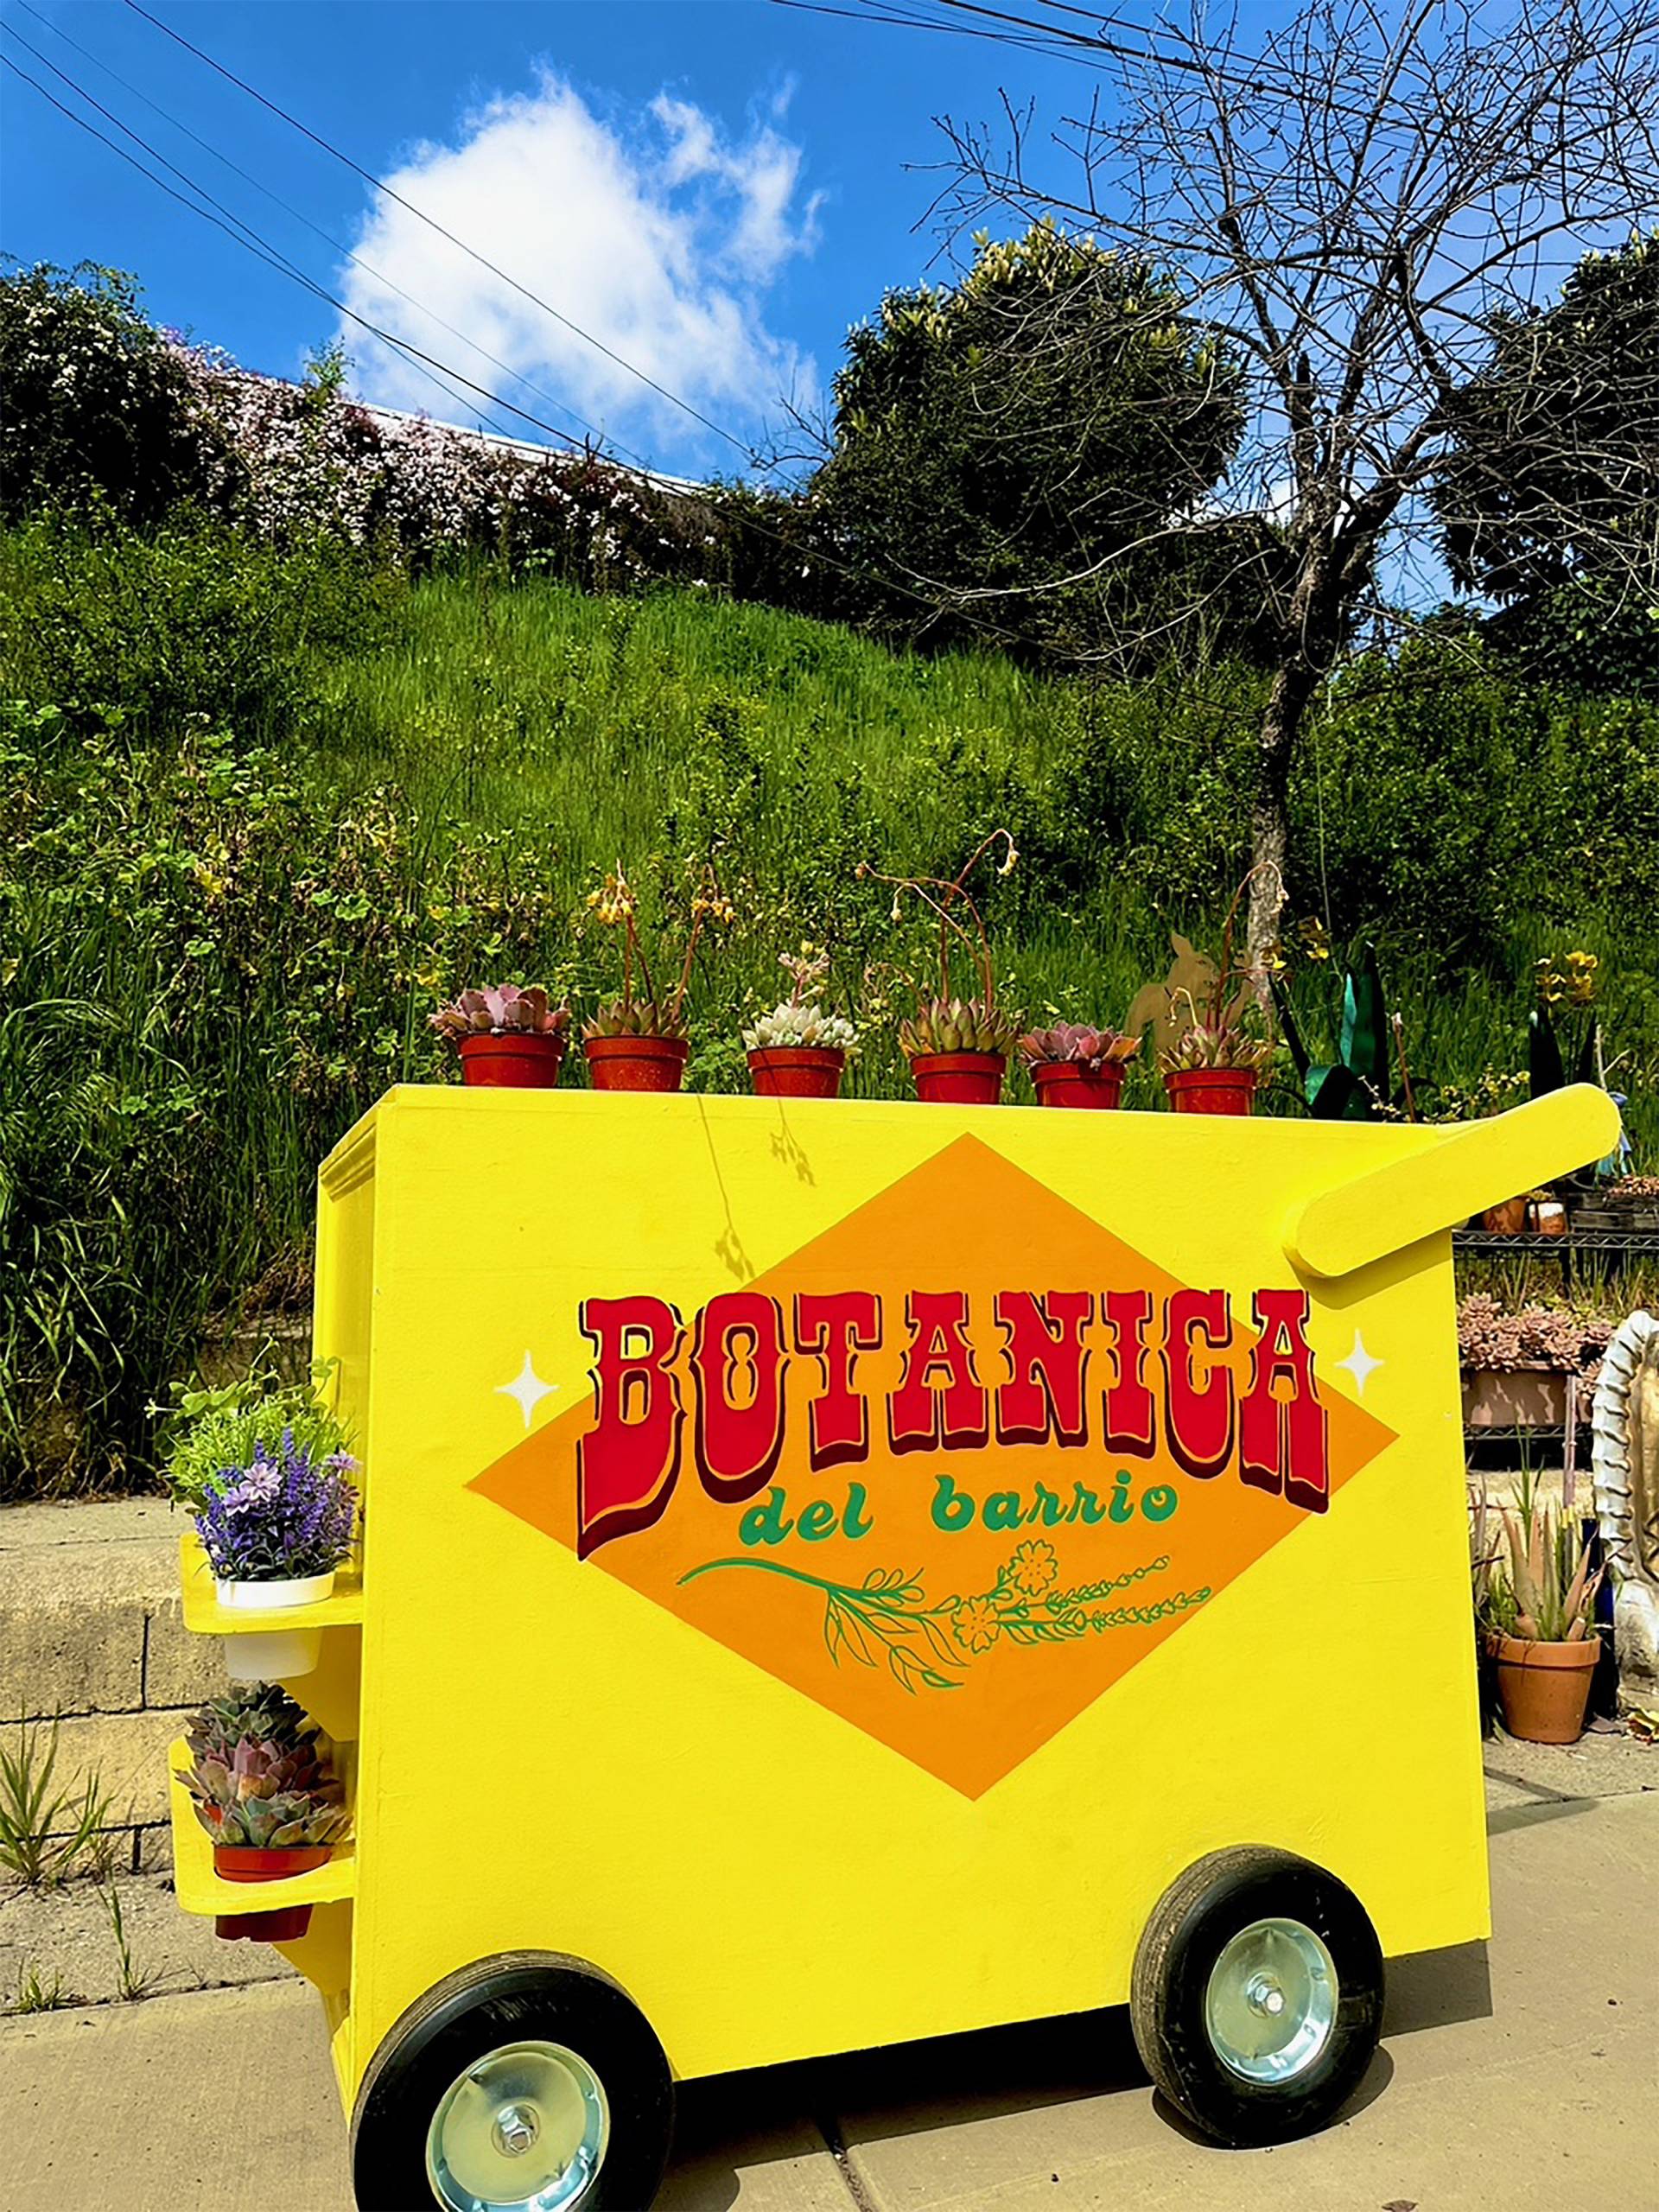 a yellow push cart labeled as Botanica del Barrio is displayed outdoors near a garden